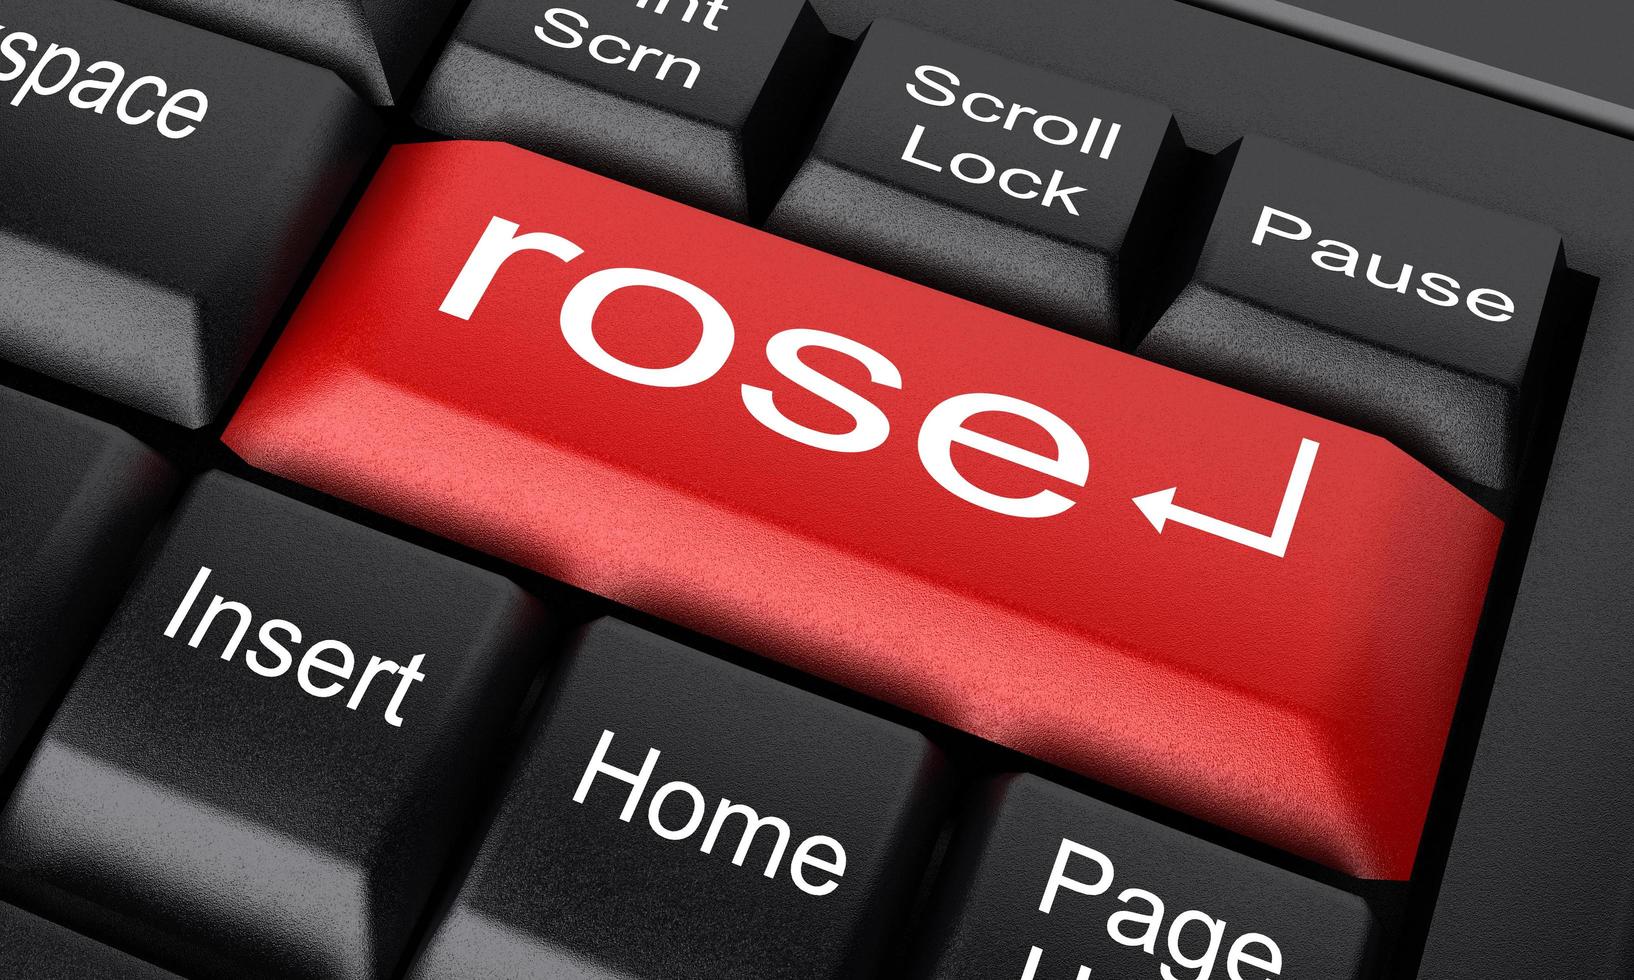 rose word on red keyboard button photo